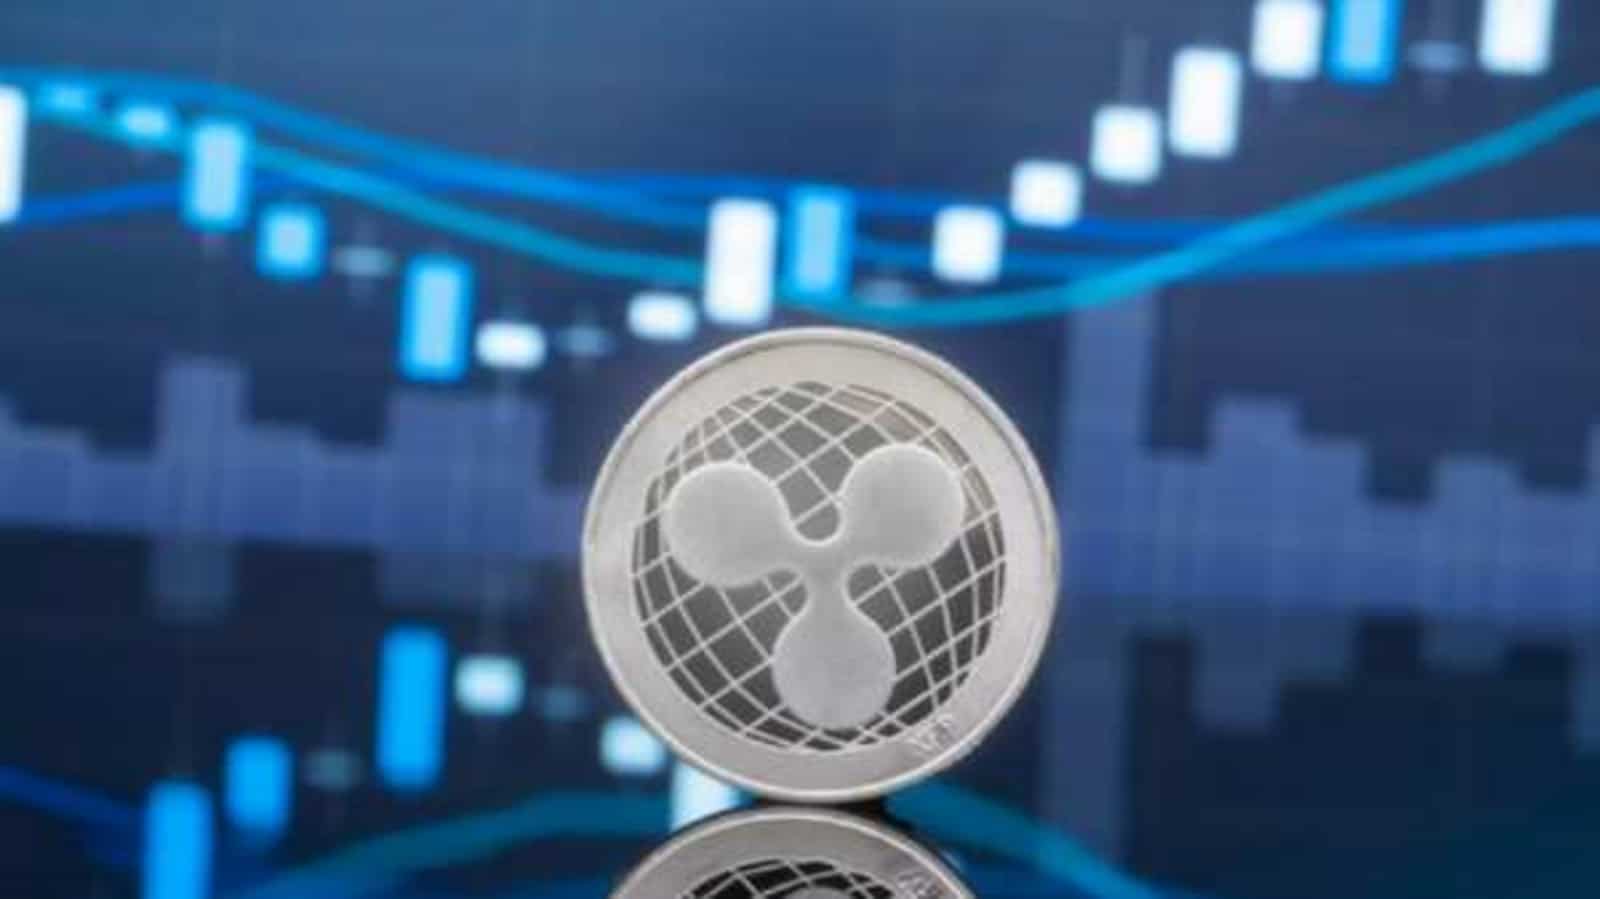 XRP Price Stumbles Near $0.47, What’s Next With Selling Pressure Building?